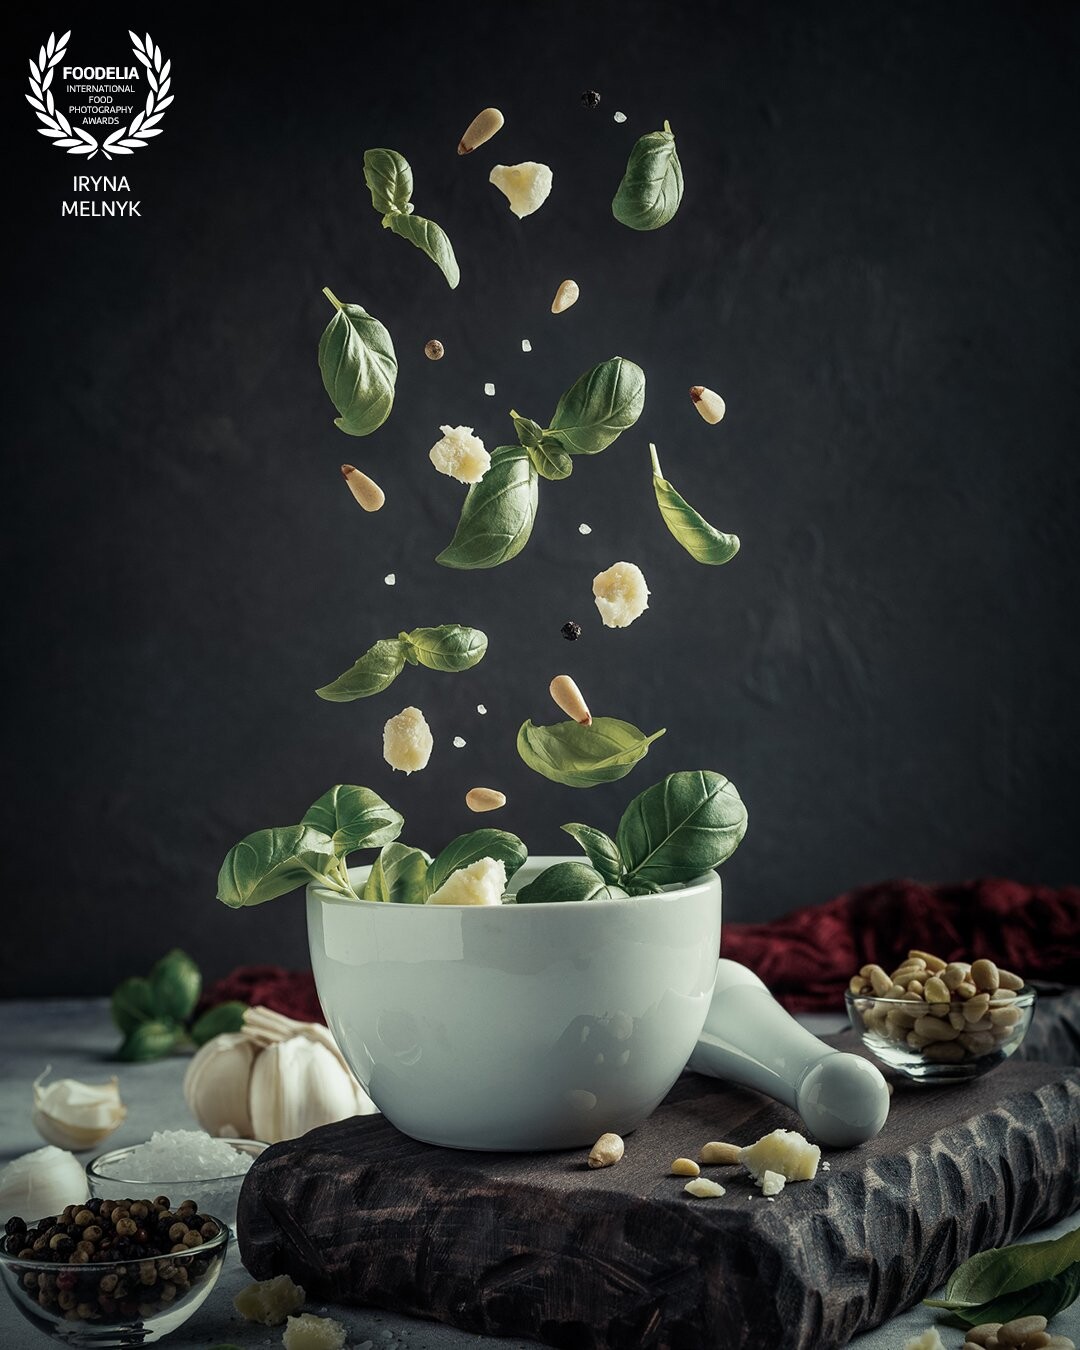 Delicious ingredients for green pesto sauce are falling into a white mortar. Levitation is one of the most interesting types of food photography and my passion